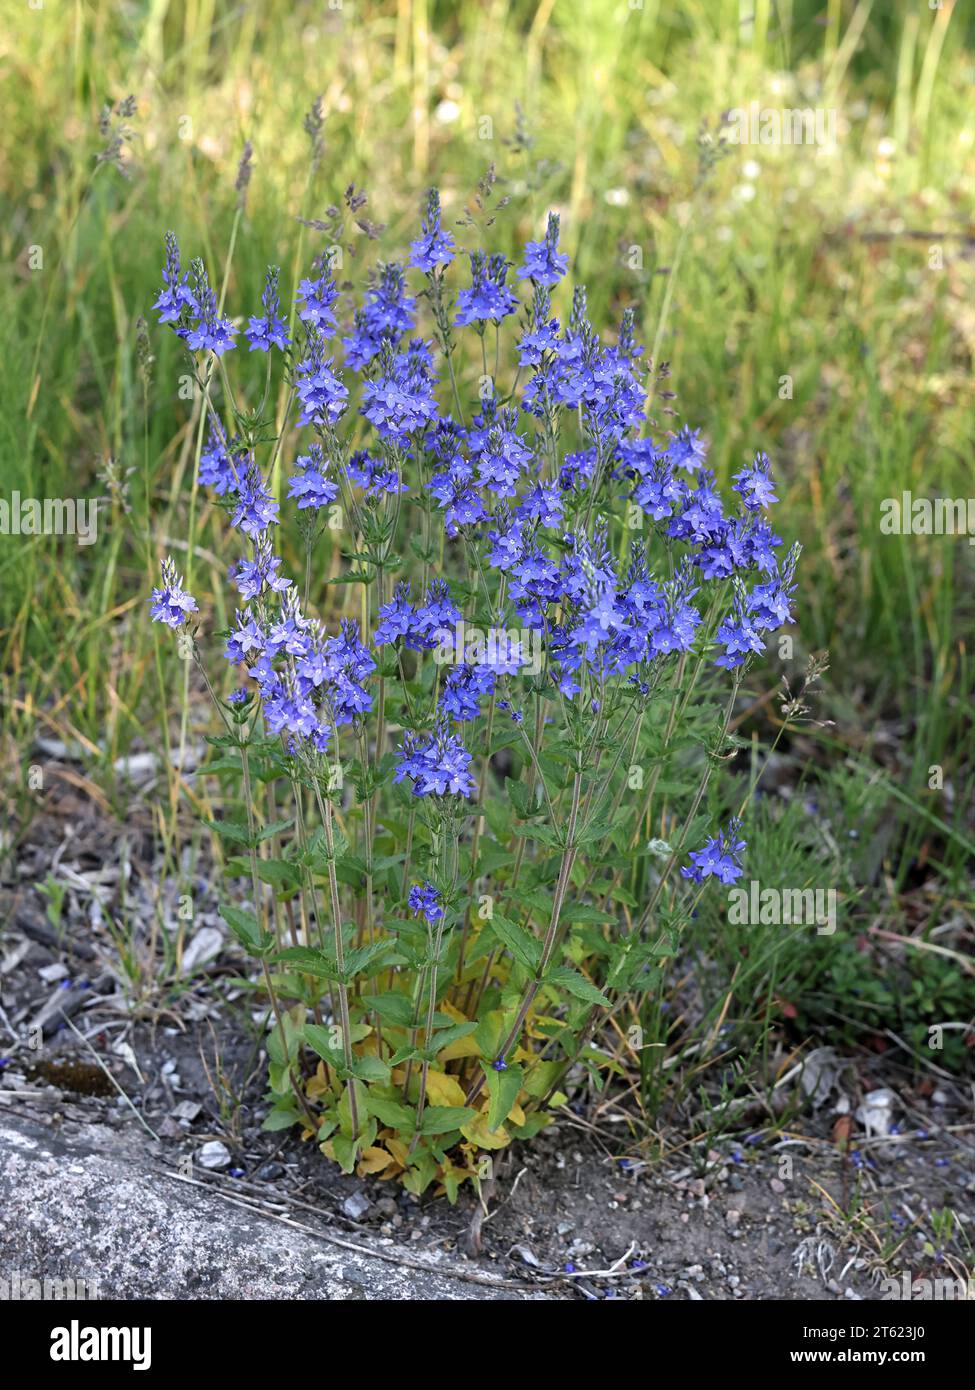 Austrian speedwell, Veronica austriaca, also known as broadleaf speedwell or saw-leaved speedwell, flowering plant from Finland Stock Photo